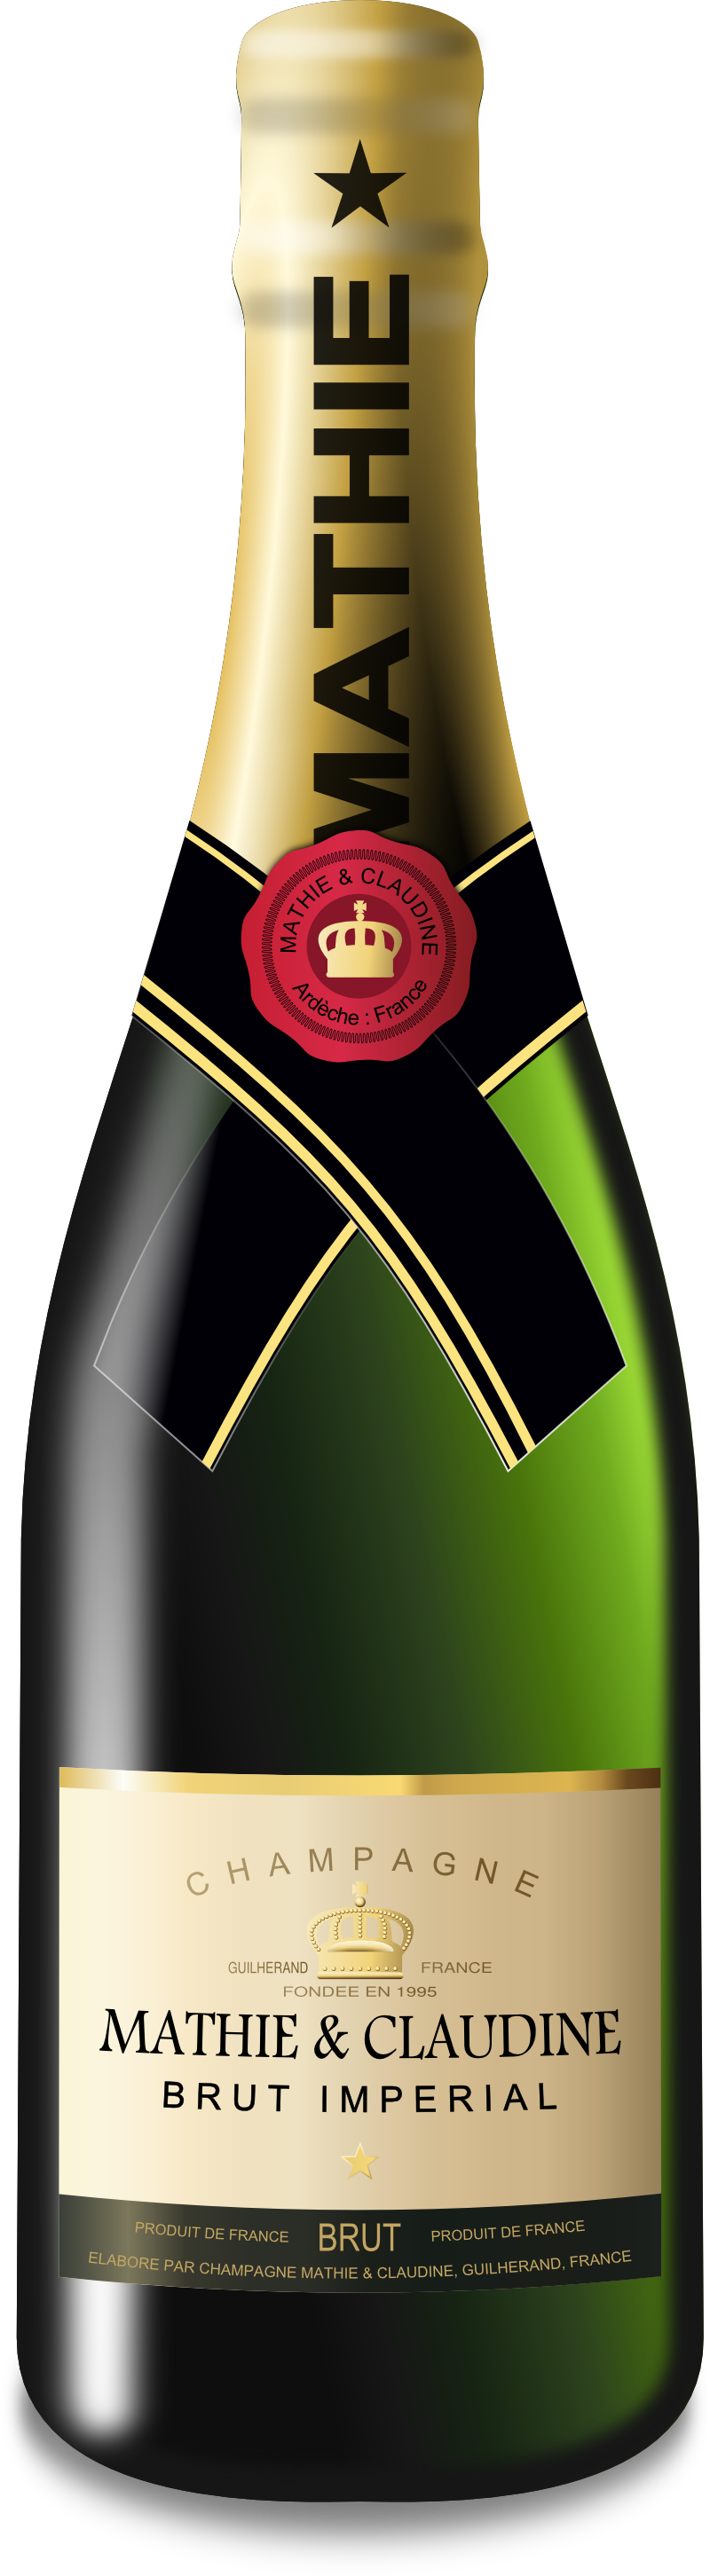 Download Champagne Bottle Png Champagne Wine Bottle Png Png Image With No Background Pngkey Com